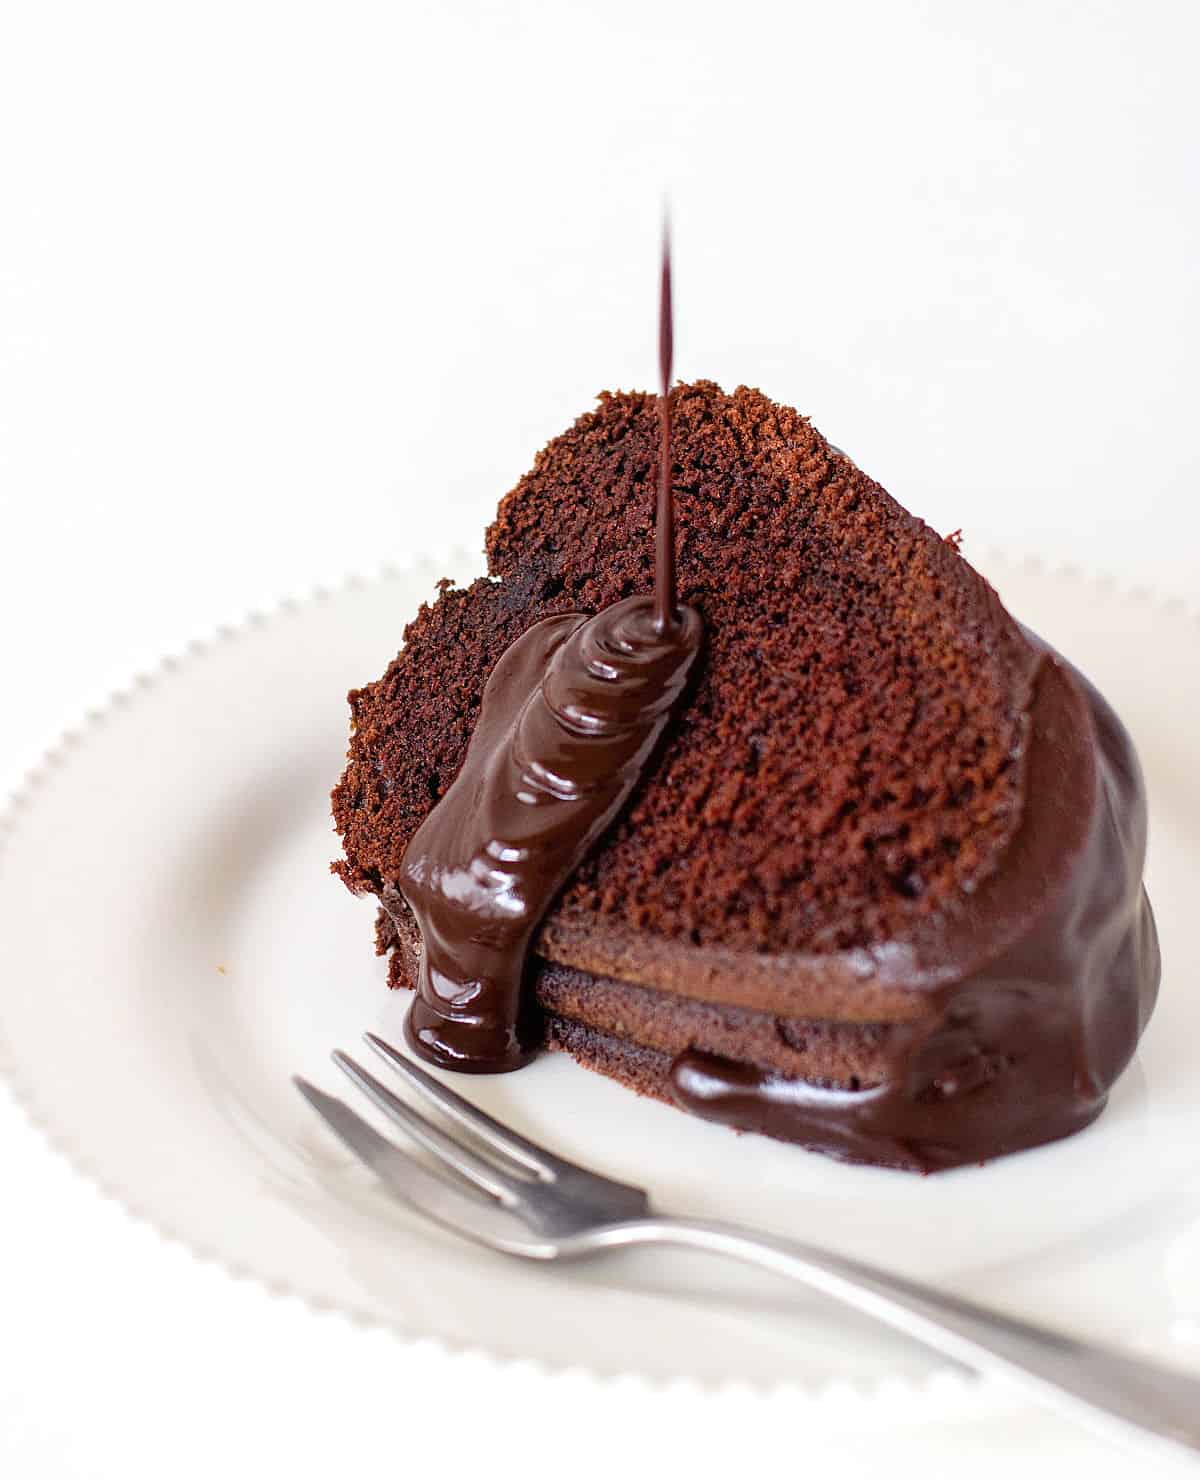 Slice of chocolate bundt cake on white plate, glaze pouring down.